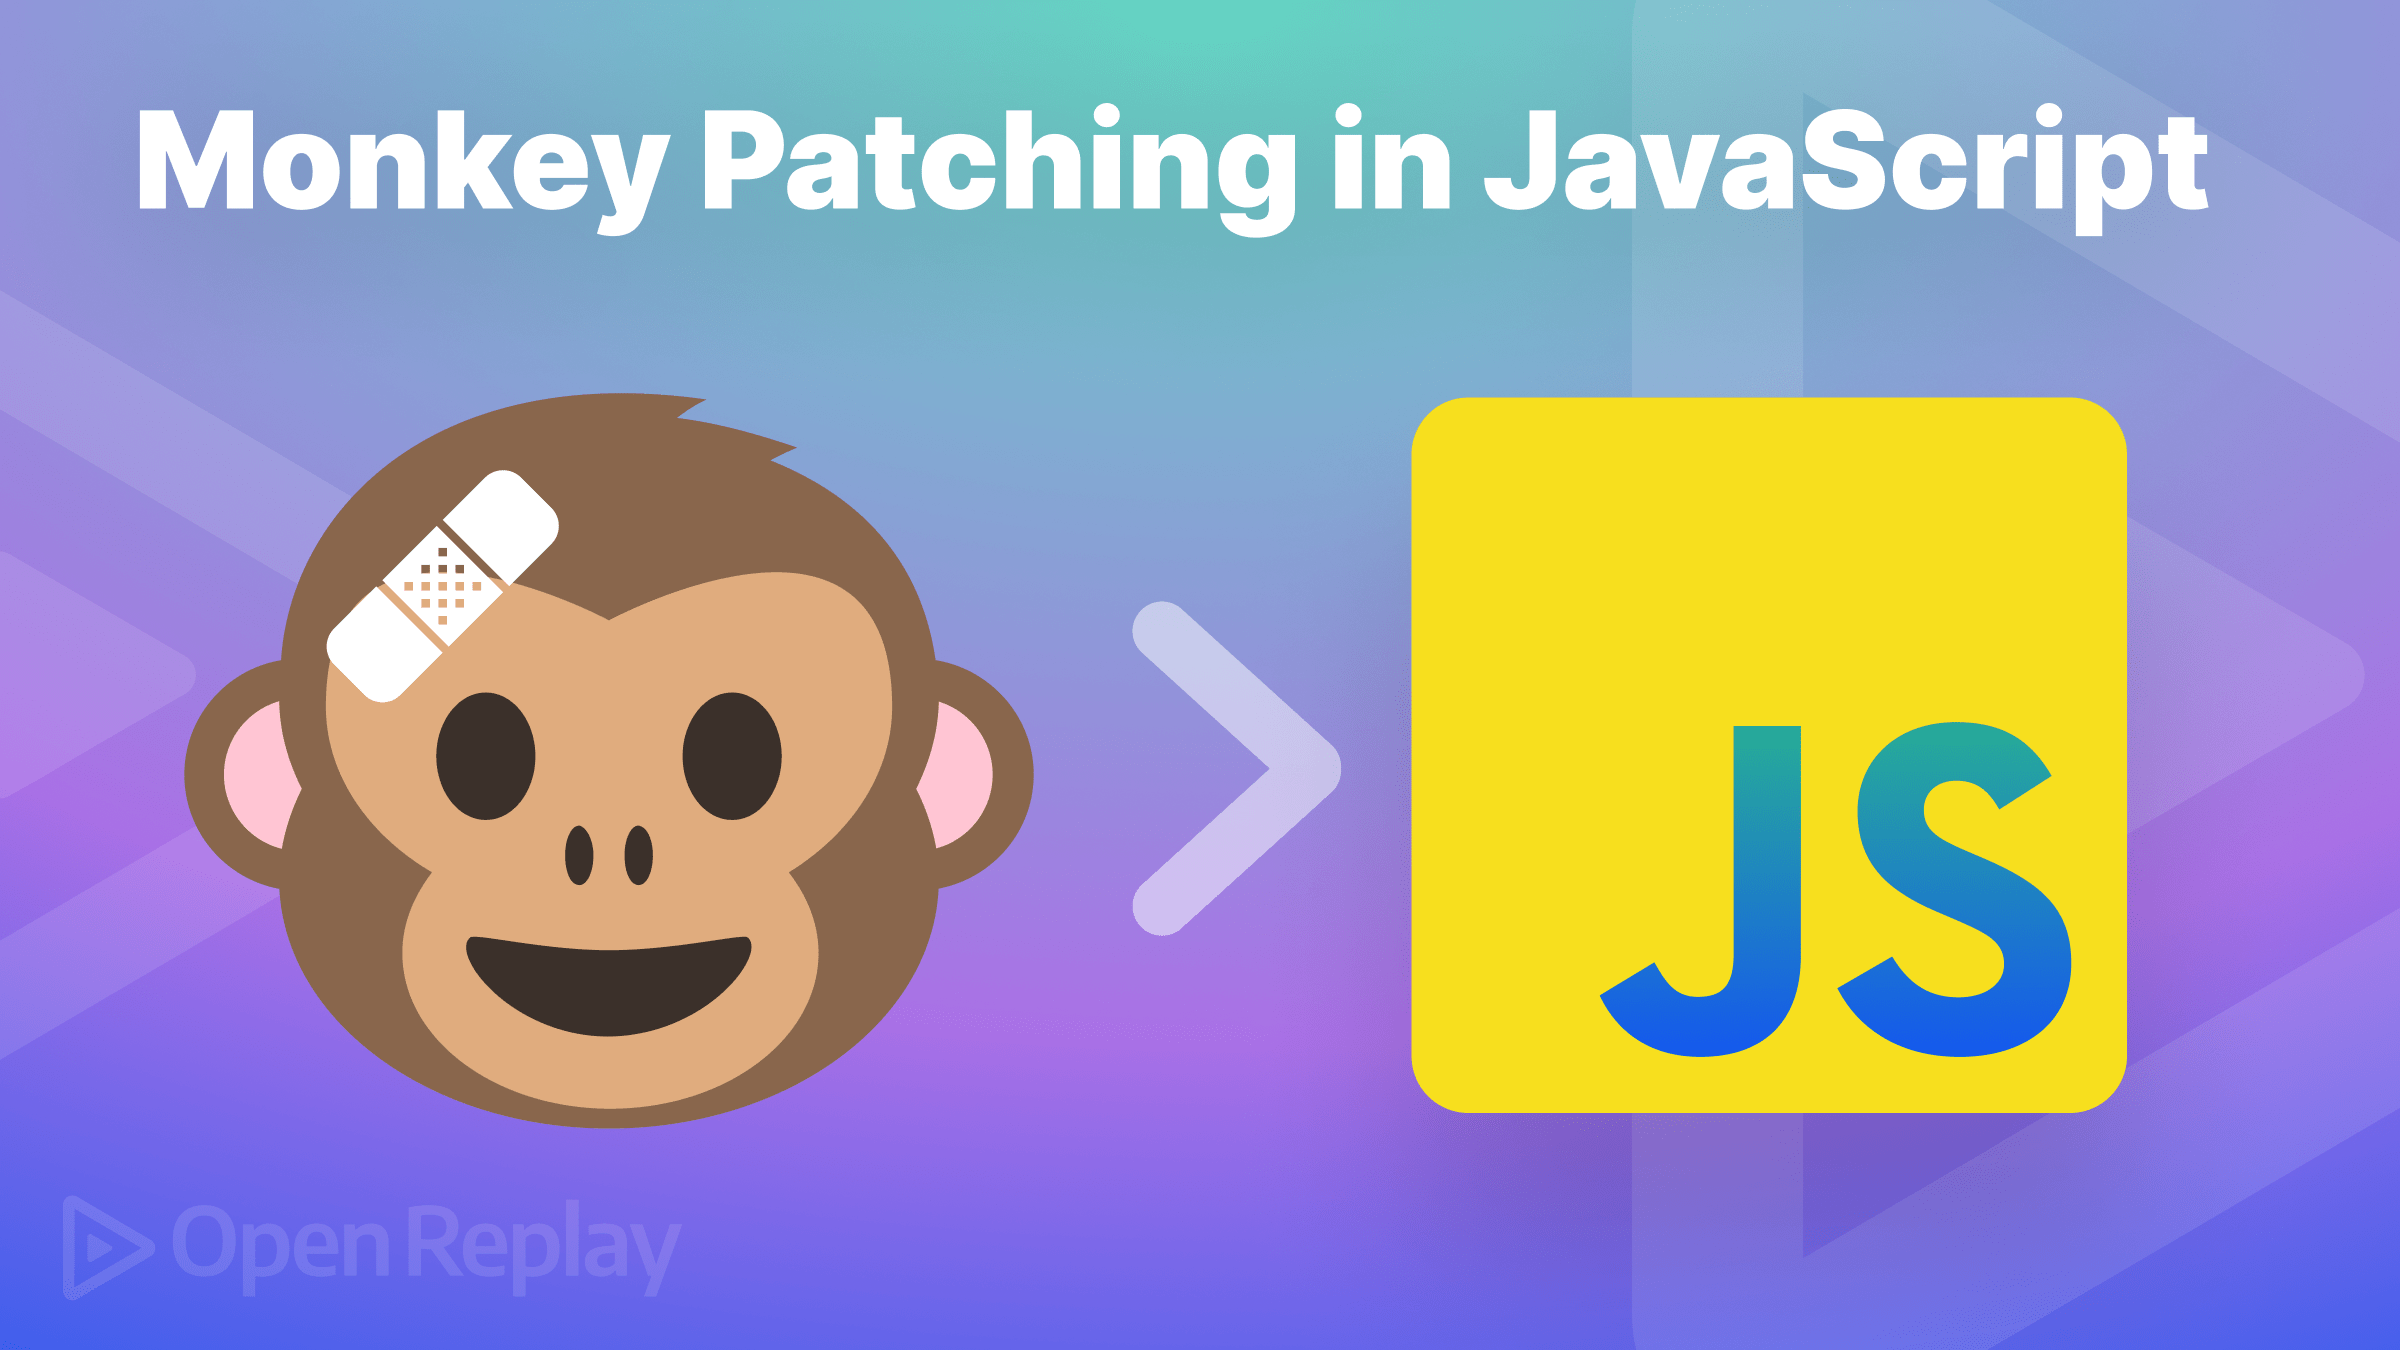 Monkey Patching in JavaScript